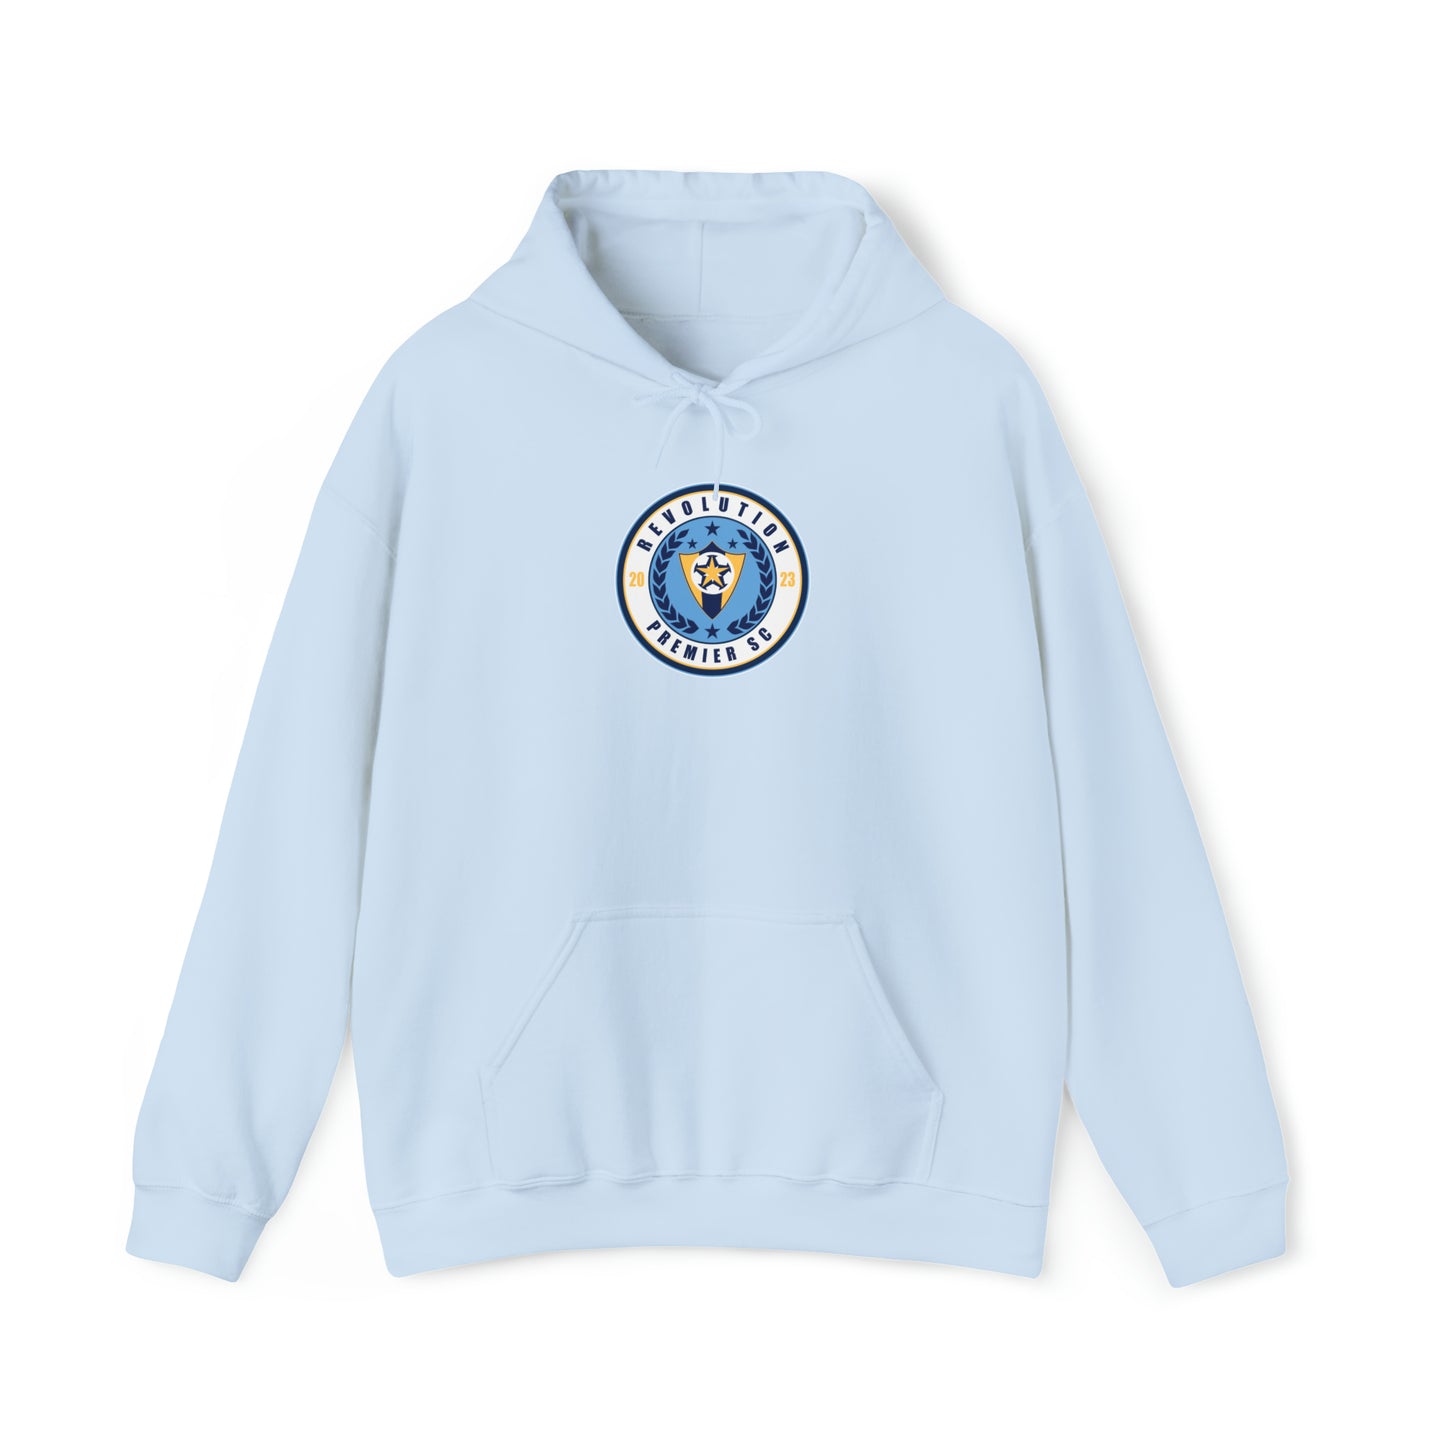 RPSC PLAYER - Training HOODIE